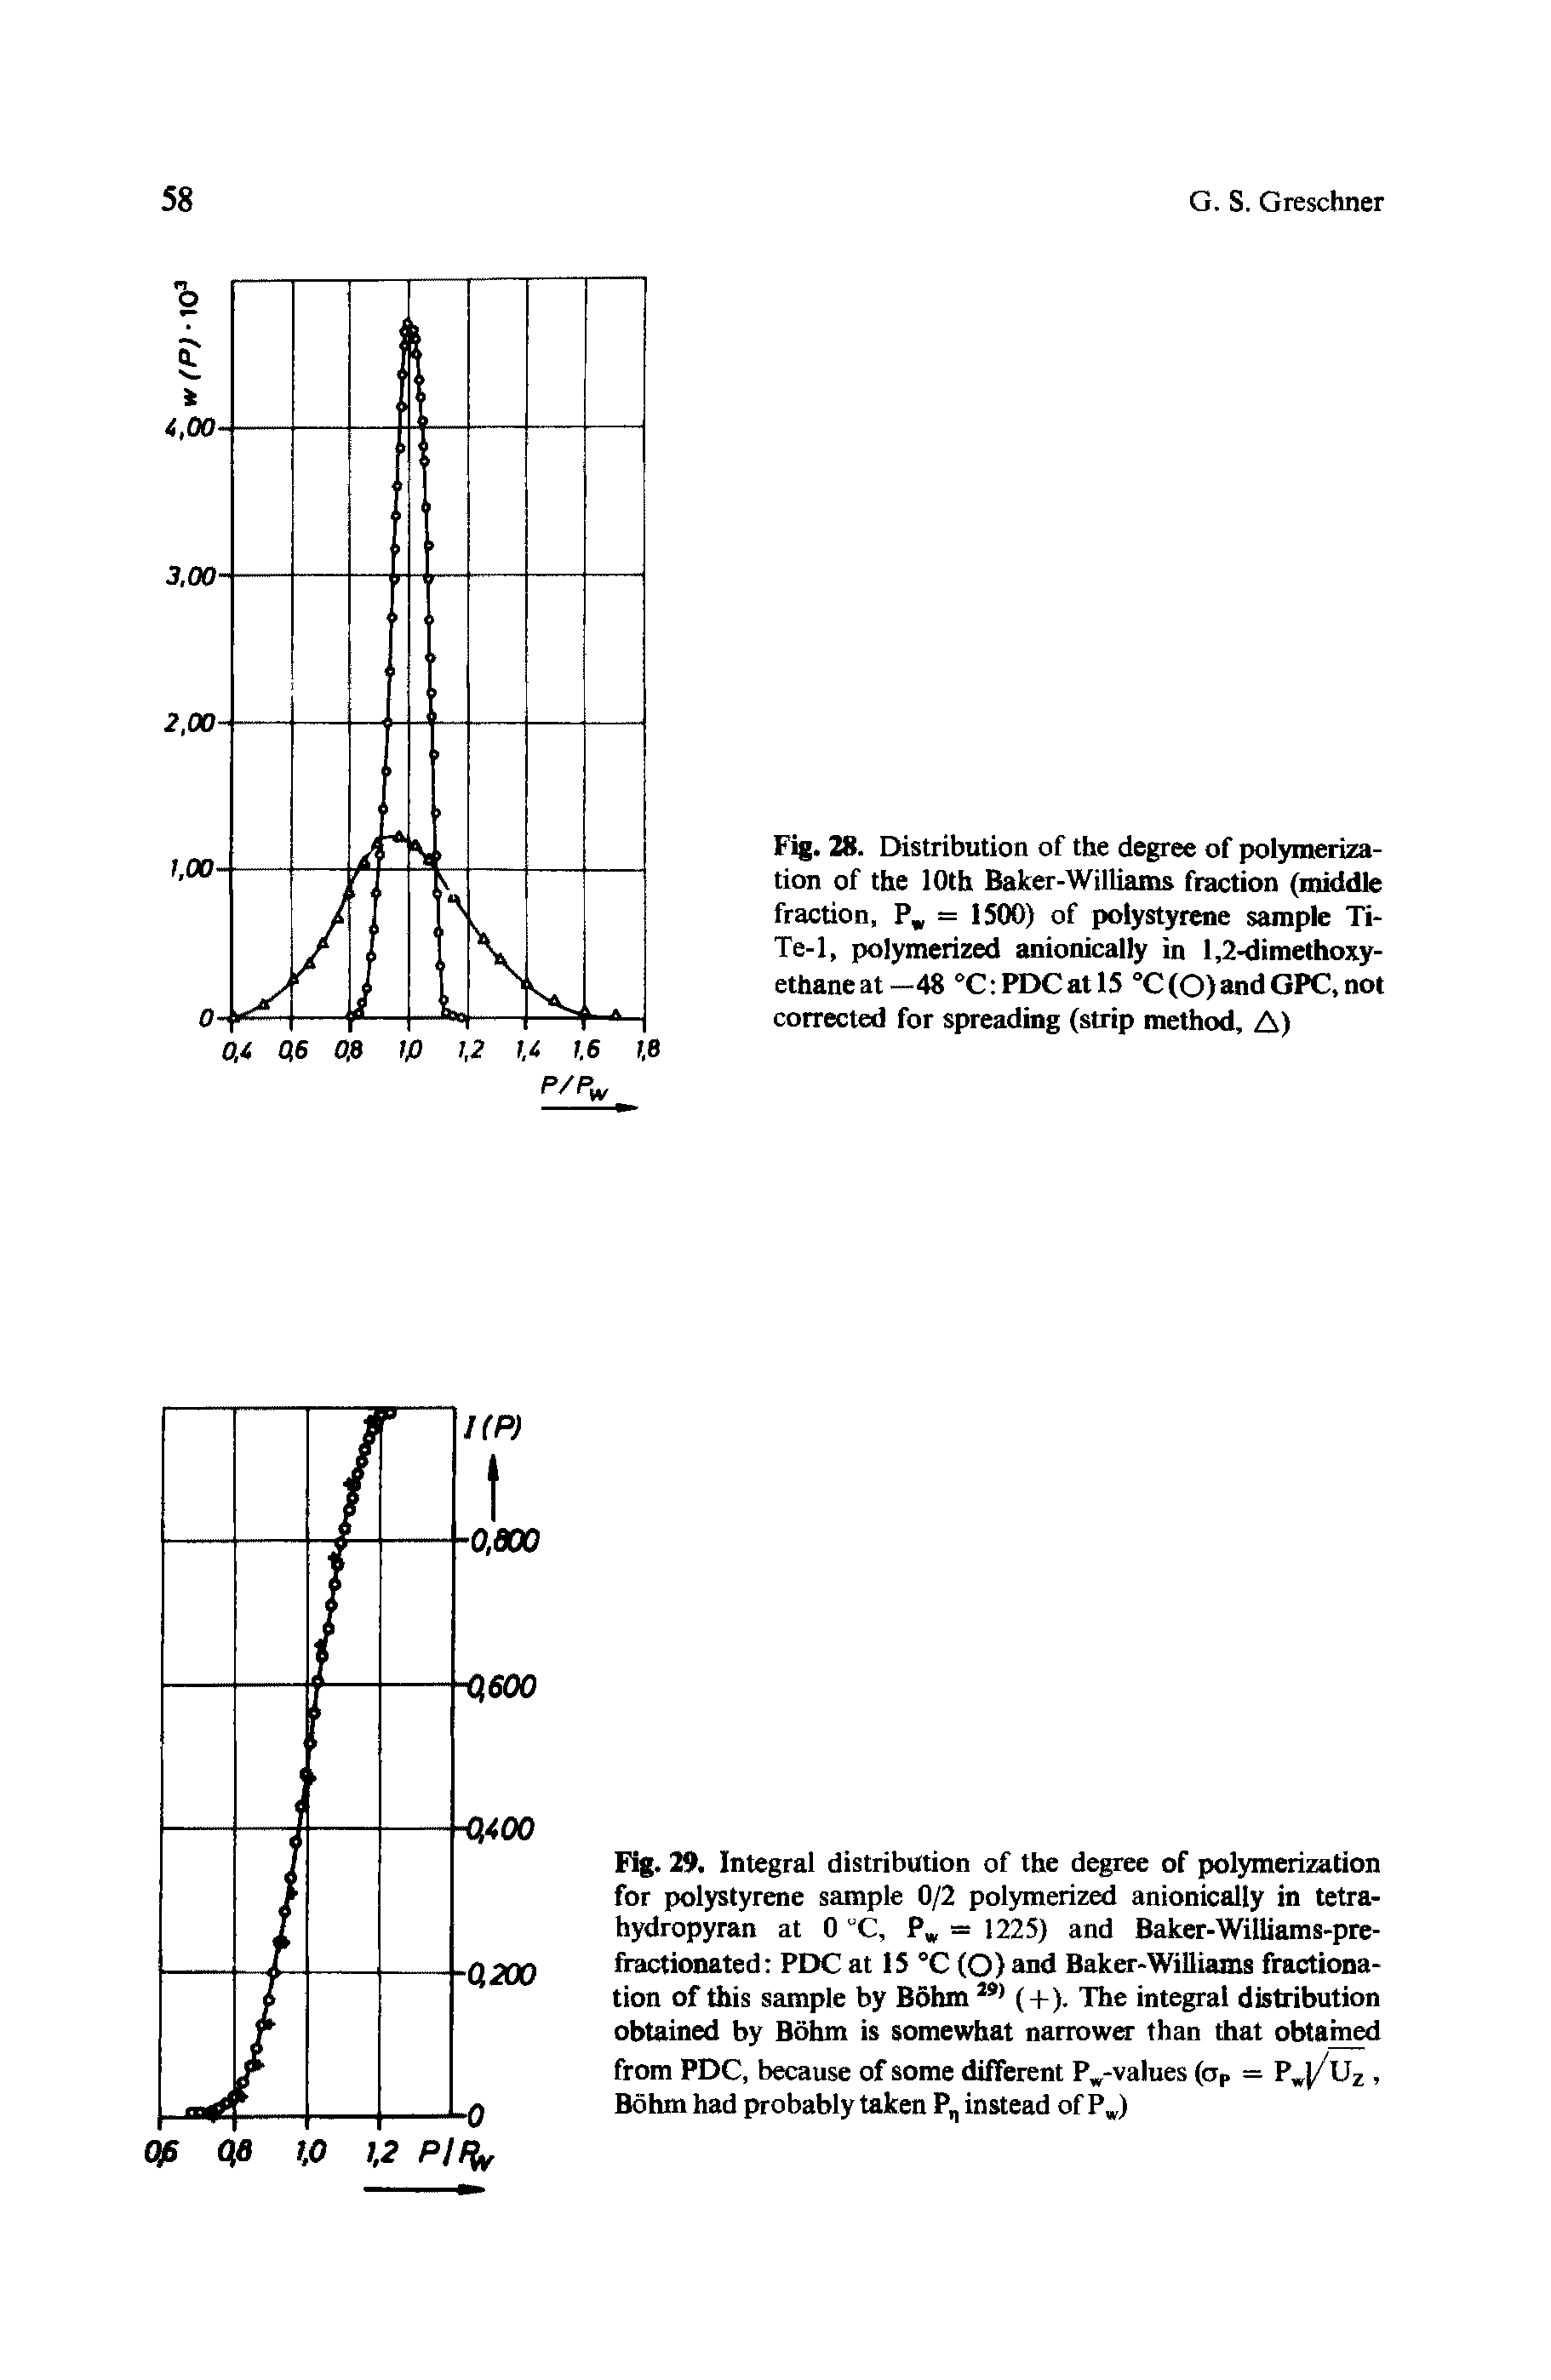 Fig. 28. Distribution of the degree of polymerization of the 10th Baker-Williams fraction (middle fraction, Pw = 1500) of polystyrene sample Ti-Te-1, polymerized anionically in 1,2-dimethoxy-ethane at —48 °C PDC at 15 °C (O) and GPC, not corrected for spreading (strip method, A)...